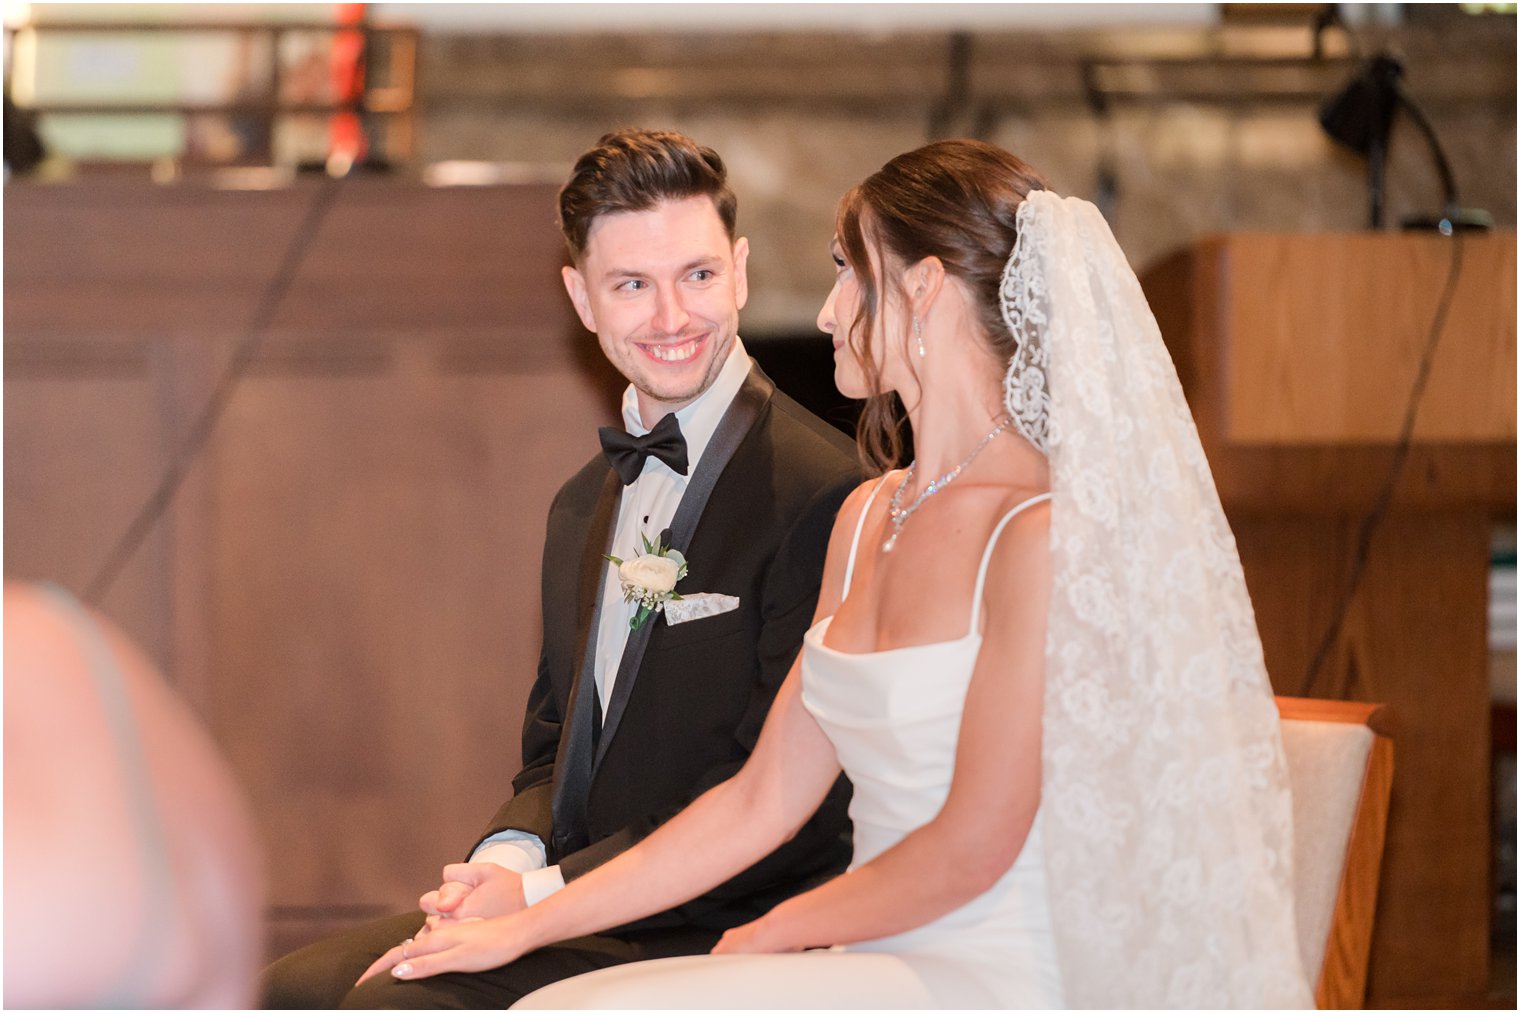 groom smiles at bride sitting together during traditional church ceremony in small New Jersey church